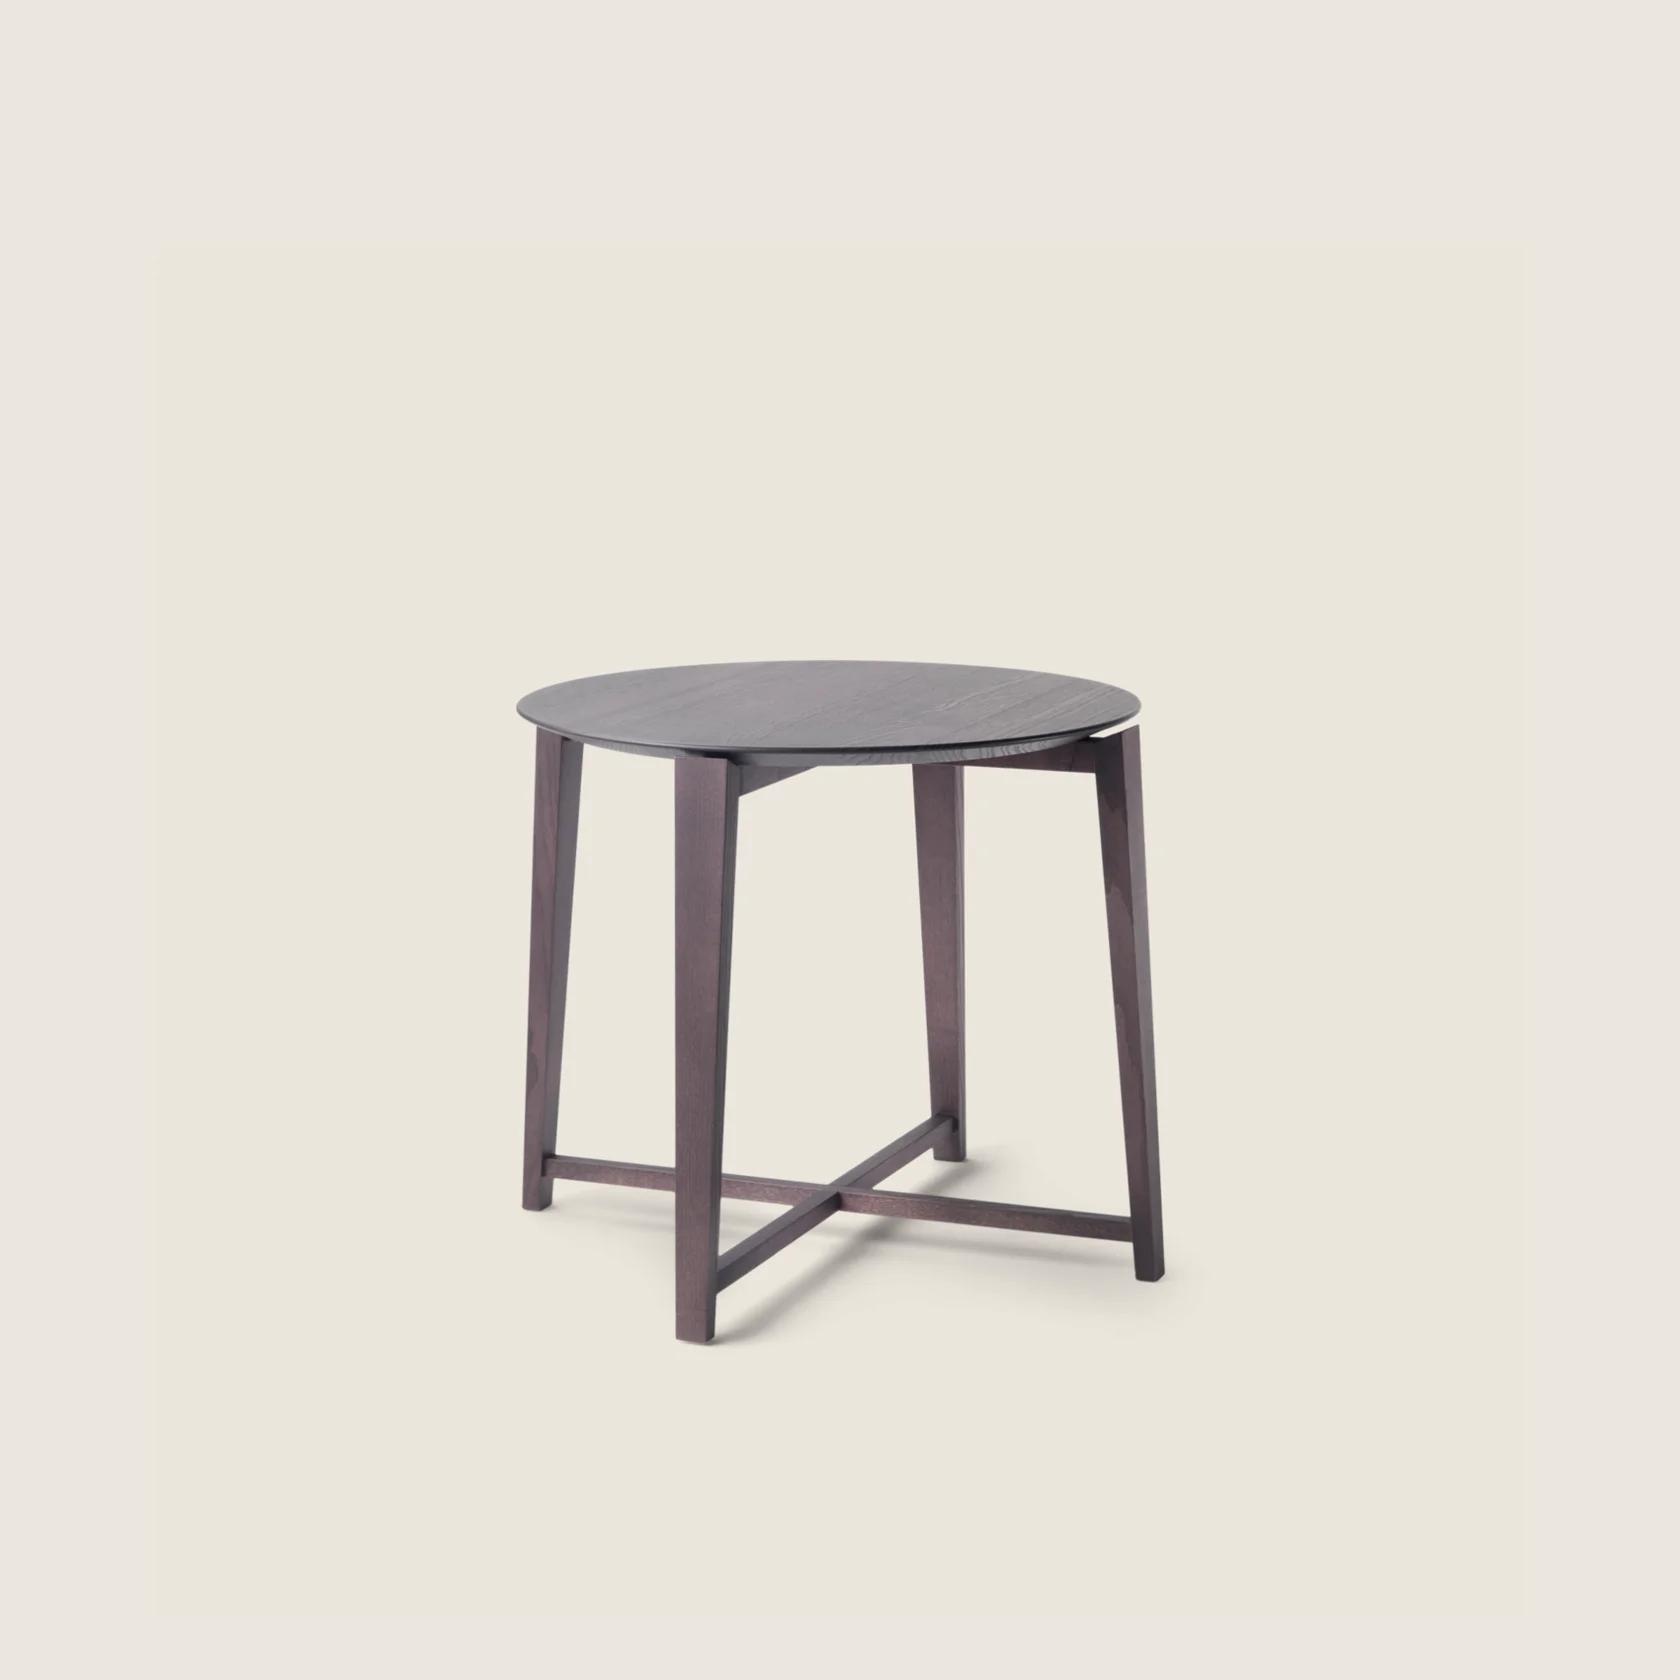 015P70_TRIS_COFFEETABLE (2).png